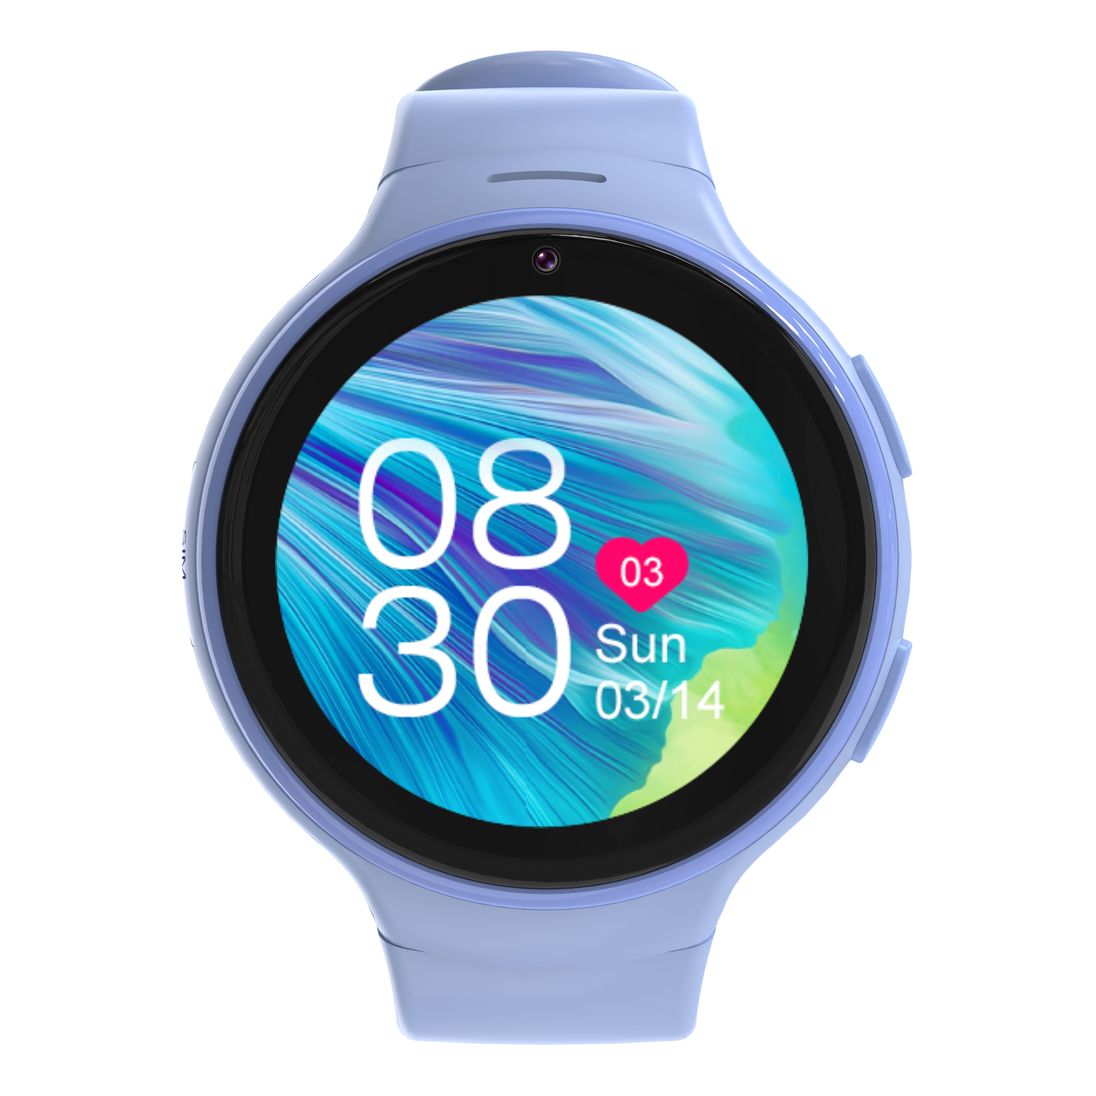 Porodo Kids 4G Smart Watch Android OS With WhatsApp - Blue